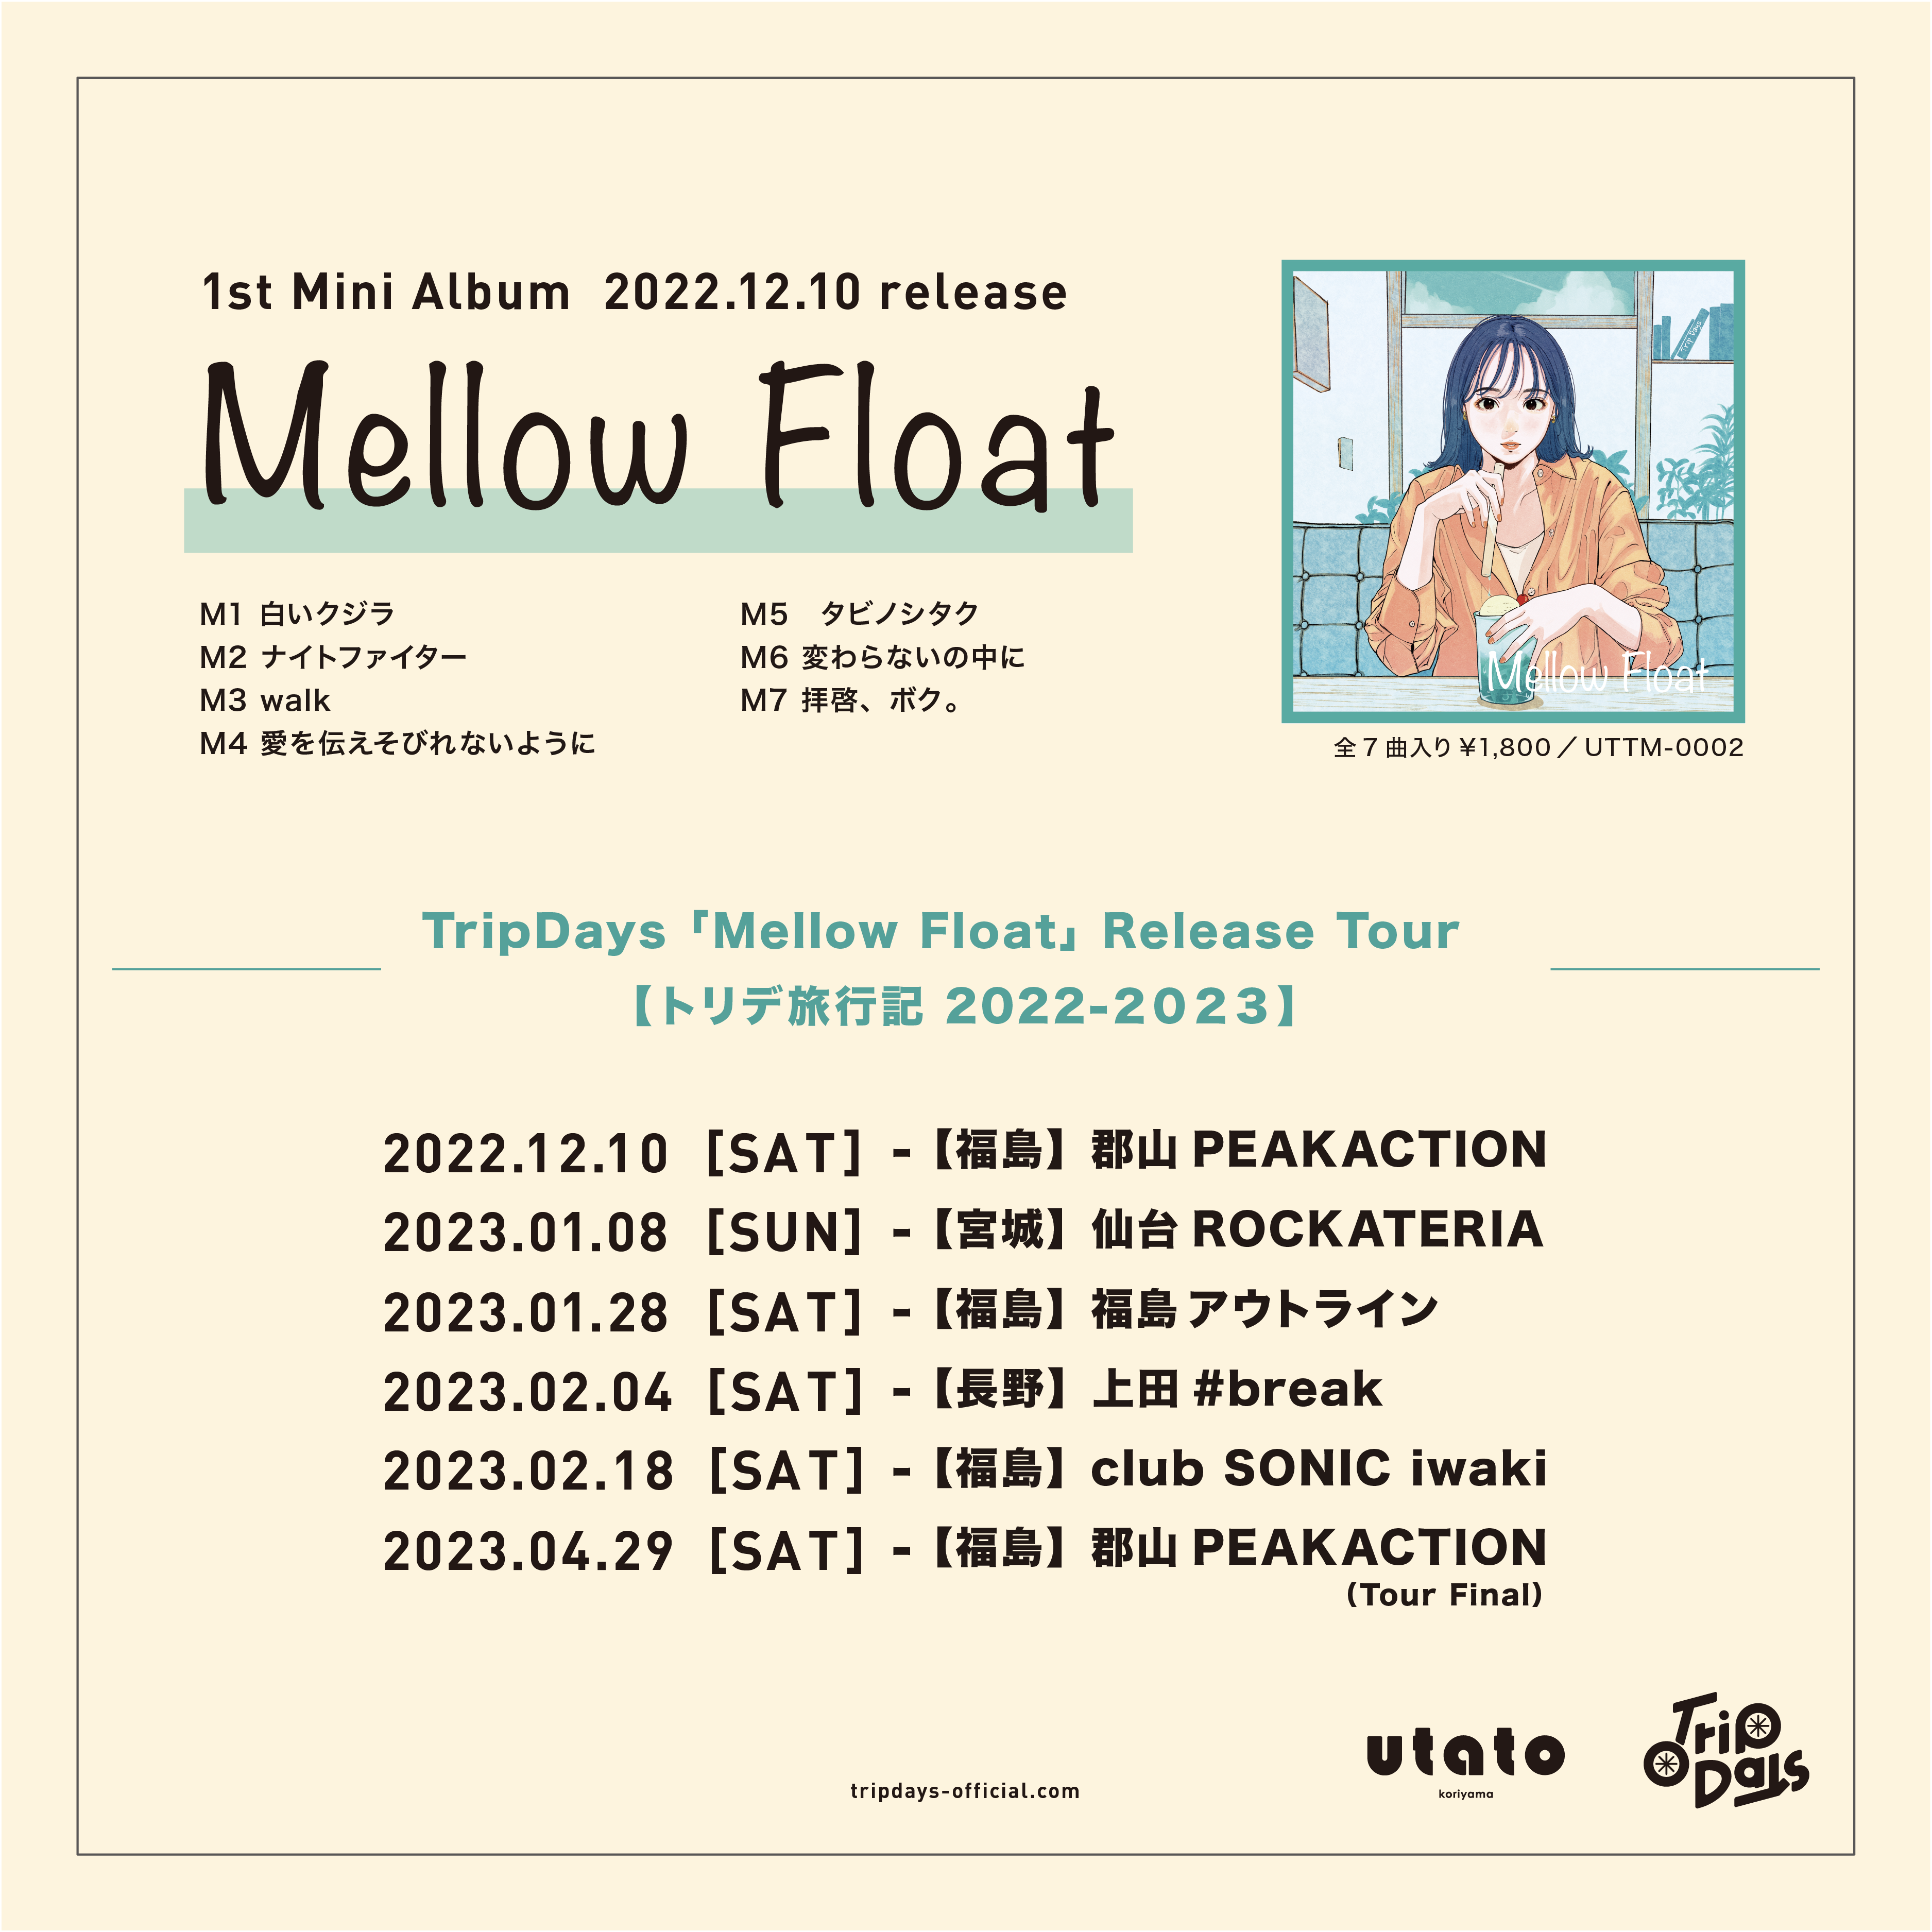 TripDays「Mellow Float」Release Tour トリデ旅行記2022-2023【いわき編】